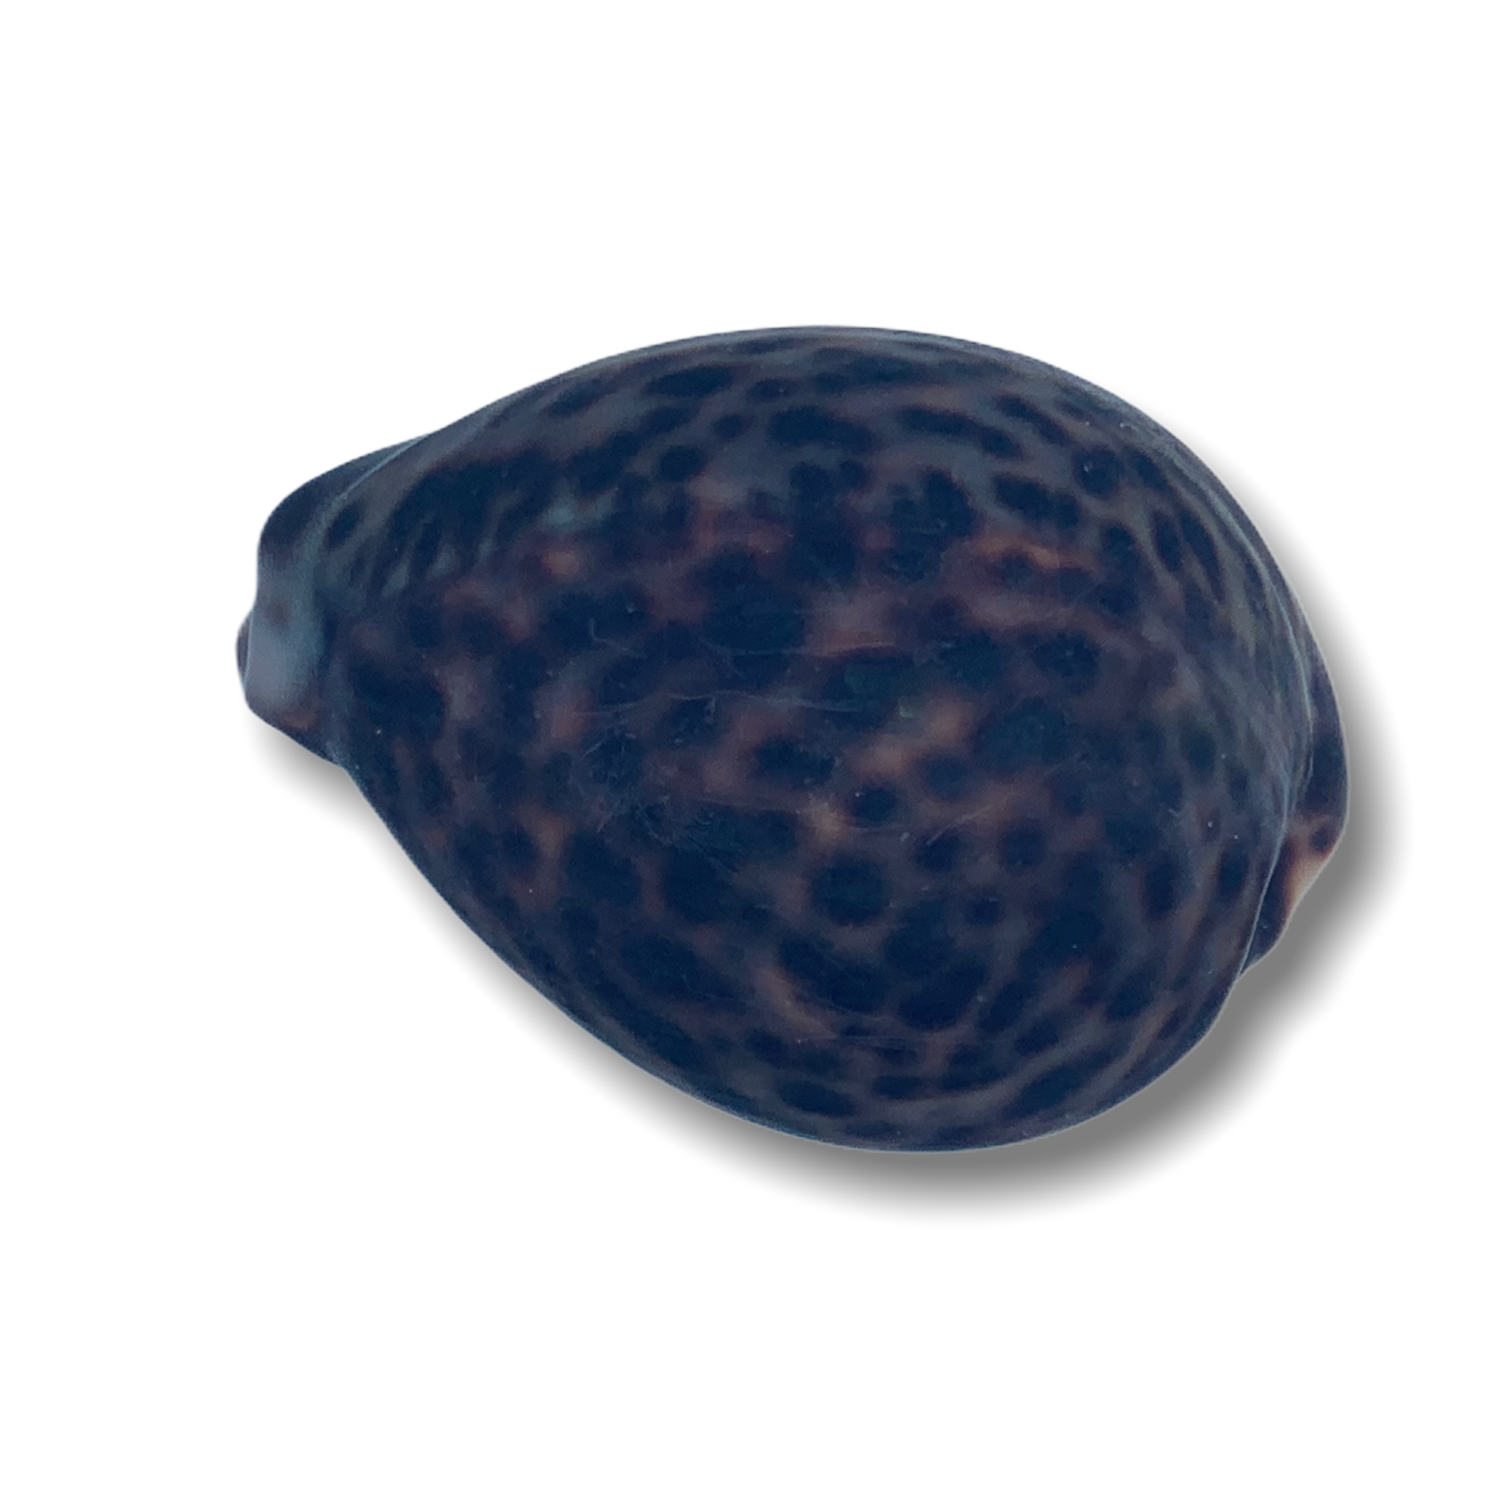 Tiger Cowrie Snail (Collection Only)